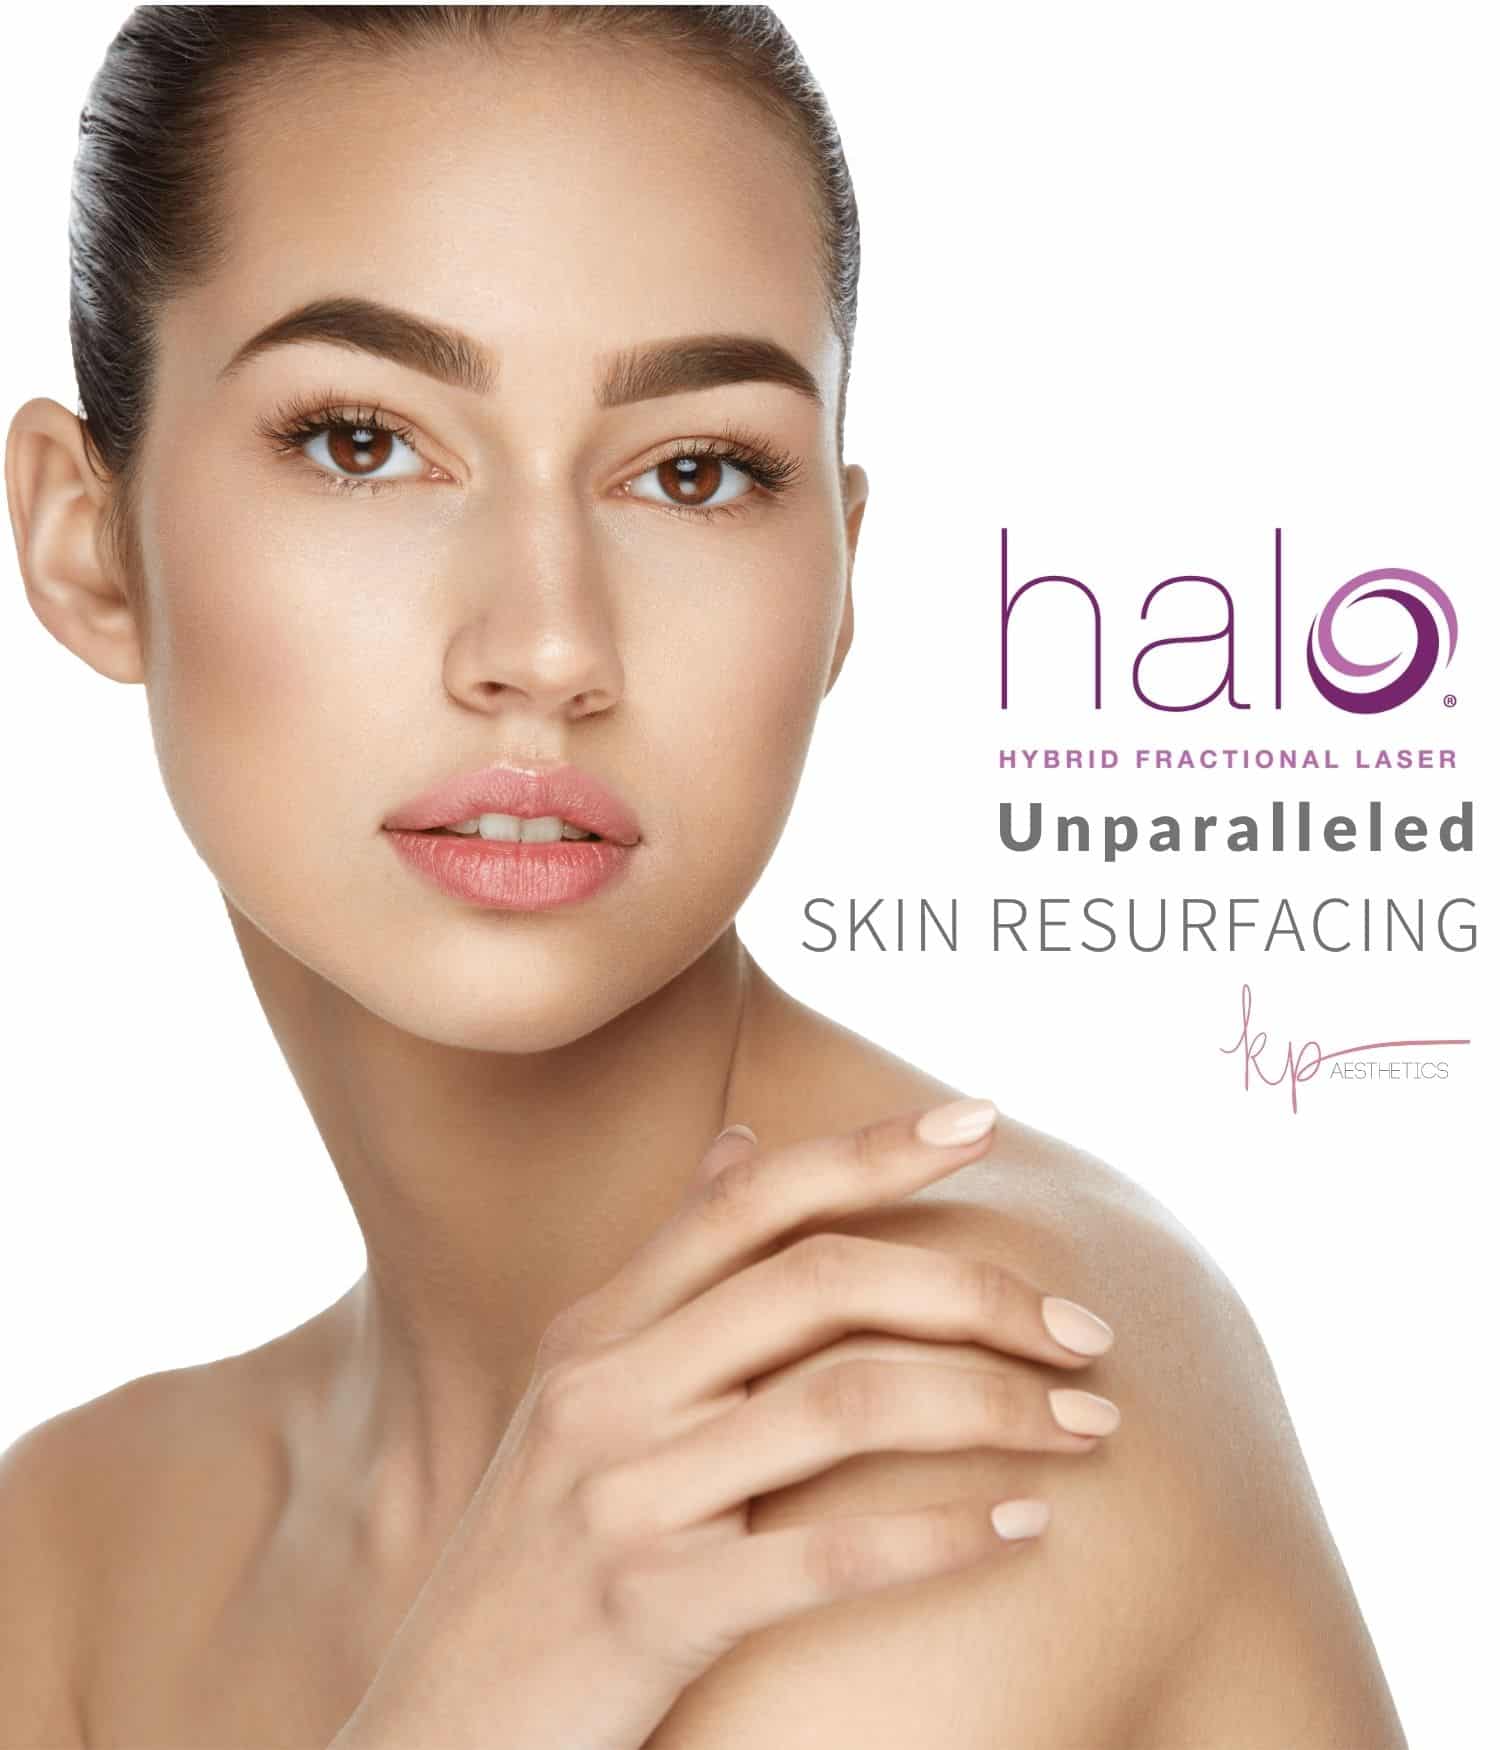 Young woman with beautiful face promoting a Silhouette Halo Hybrid Fractional Laser